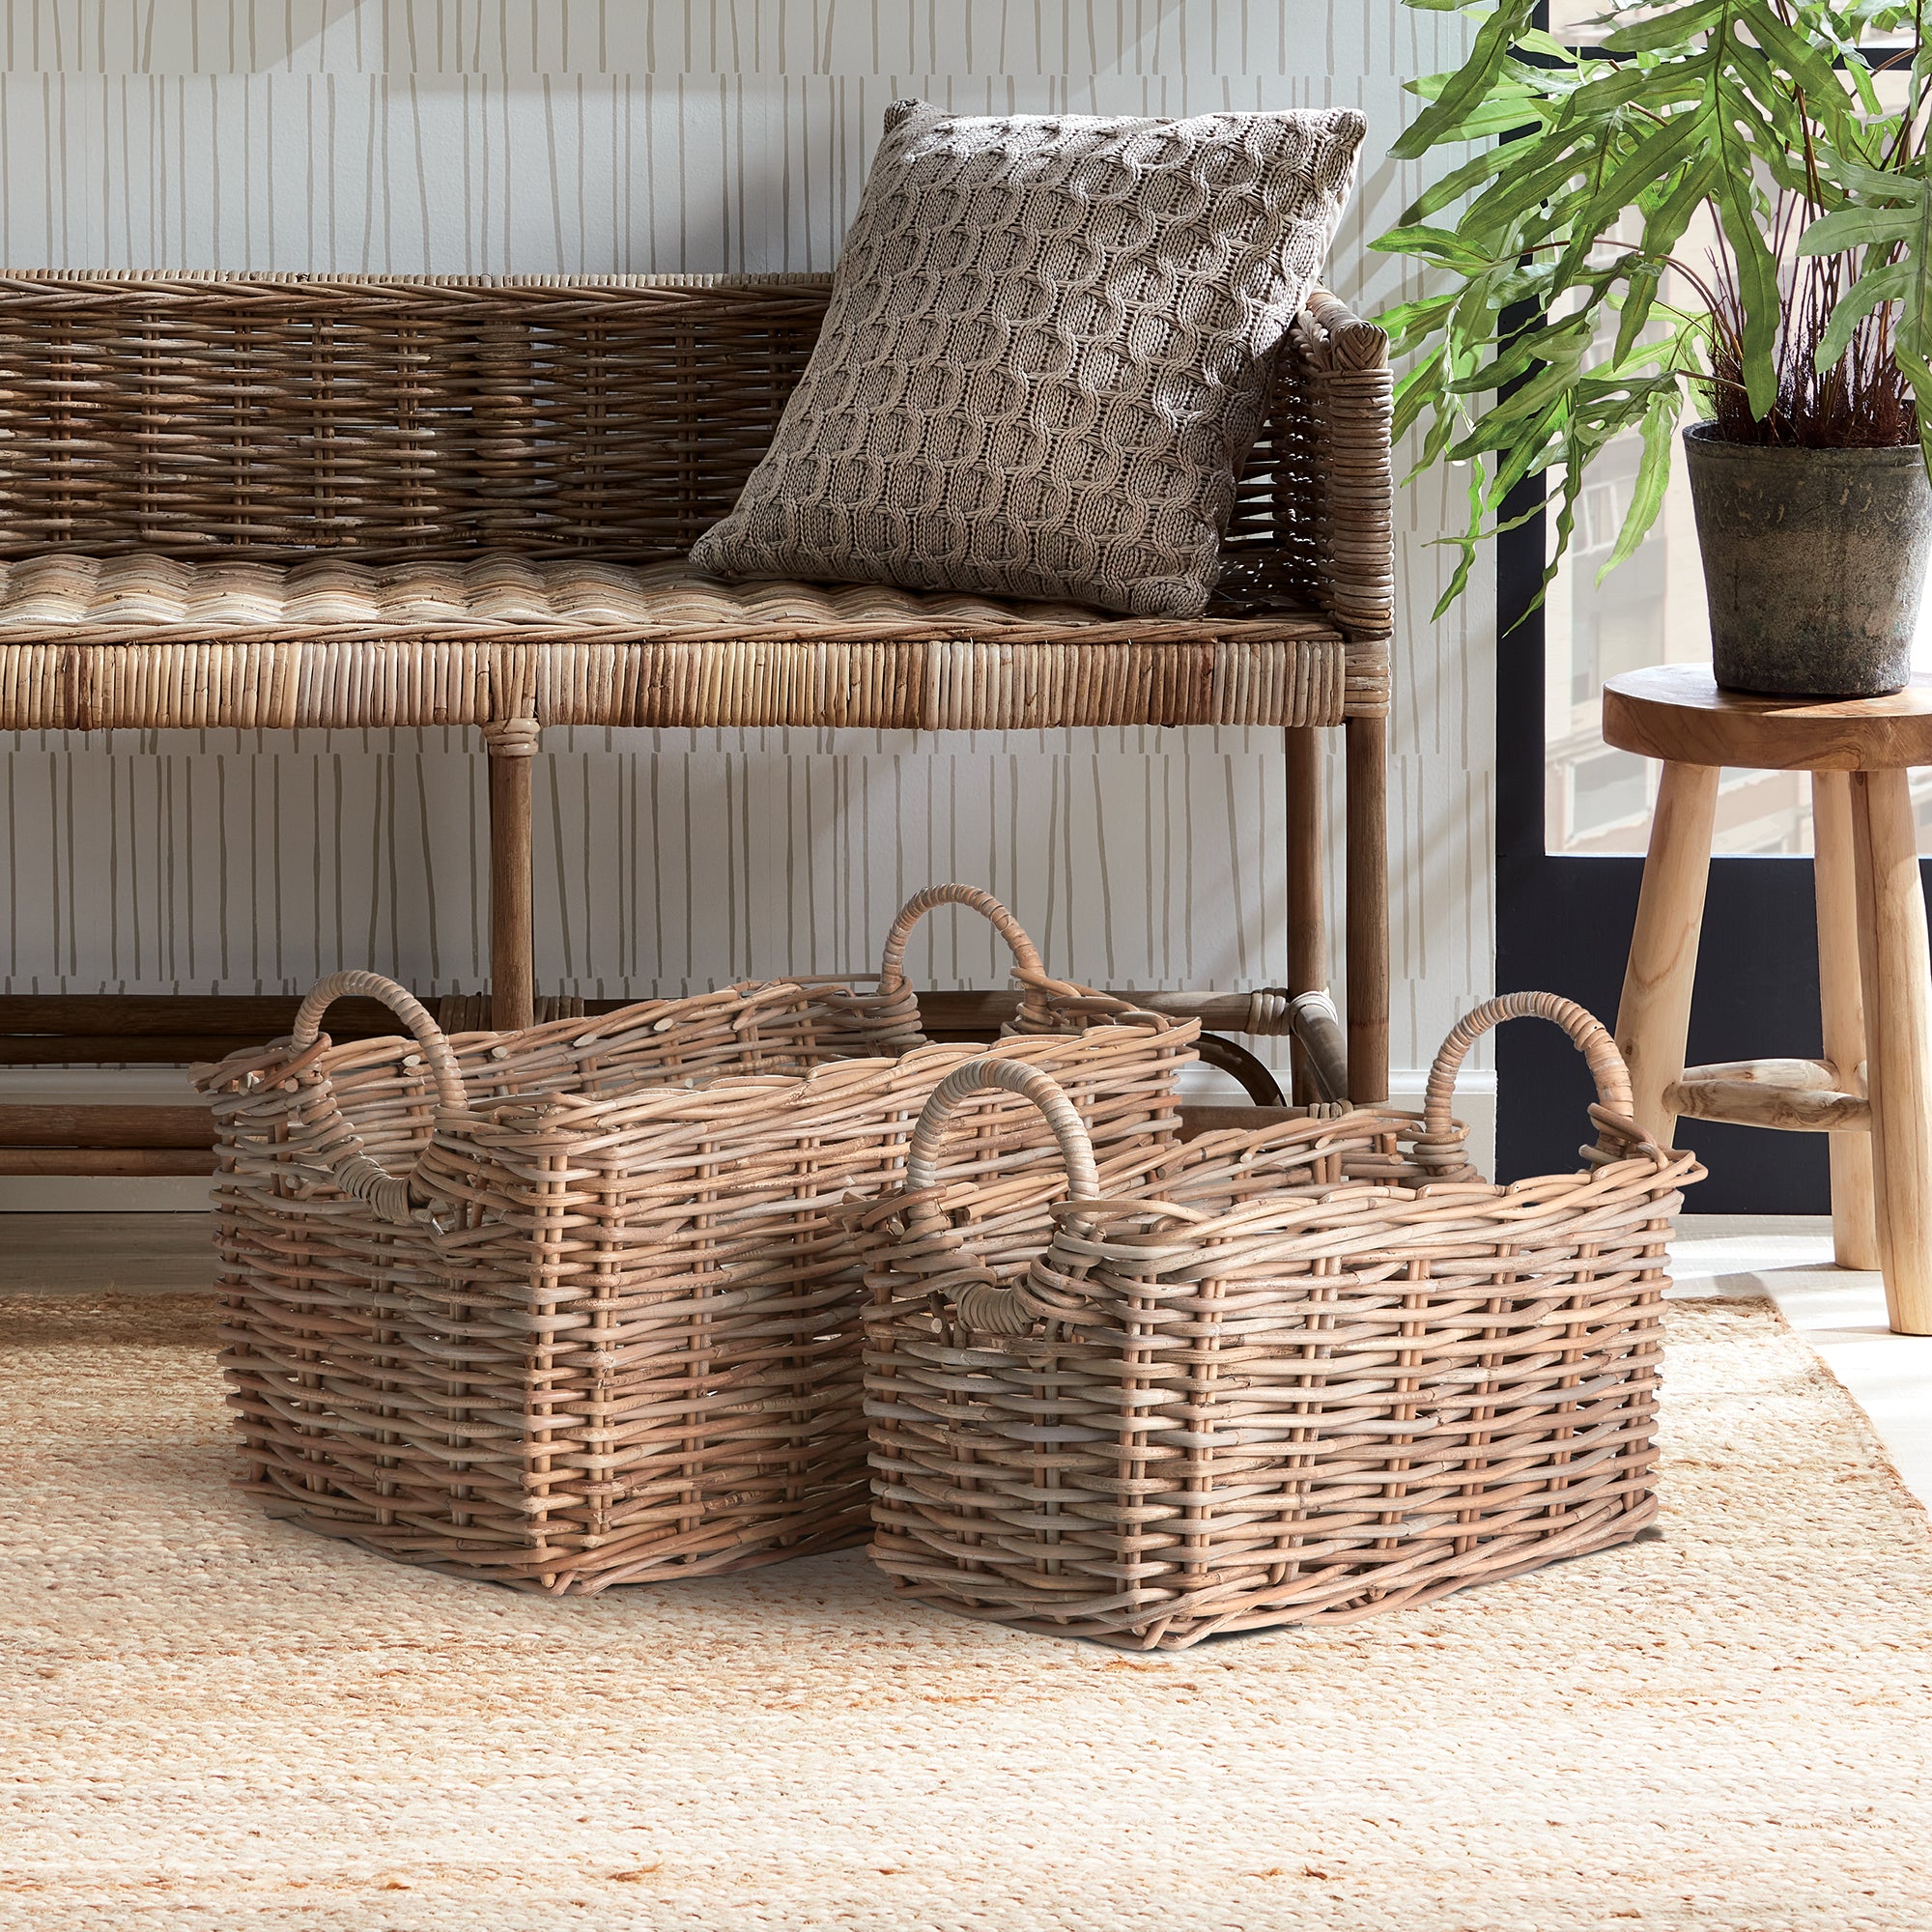 When it comes to the classic, casual appeal of rattan, these baskets are some of the best. The Halo is the cut out design of the handles that creates a unique circular detail. They make a great set of laundry baskets or any thing you need stored beautifully. Amethyst Home provides interior design, new construction, custom furniture, and area rugs in the Des Moines metro area.